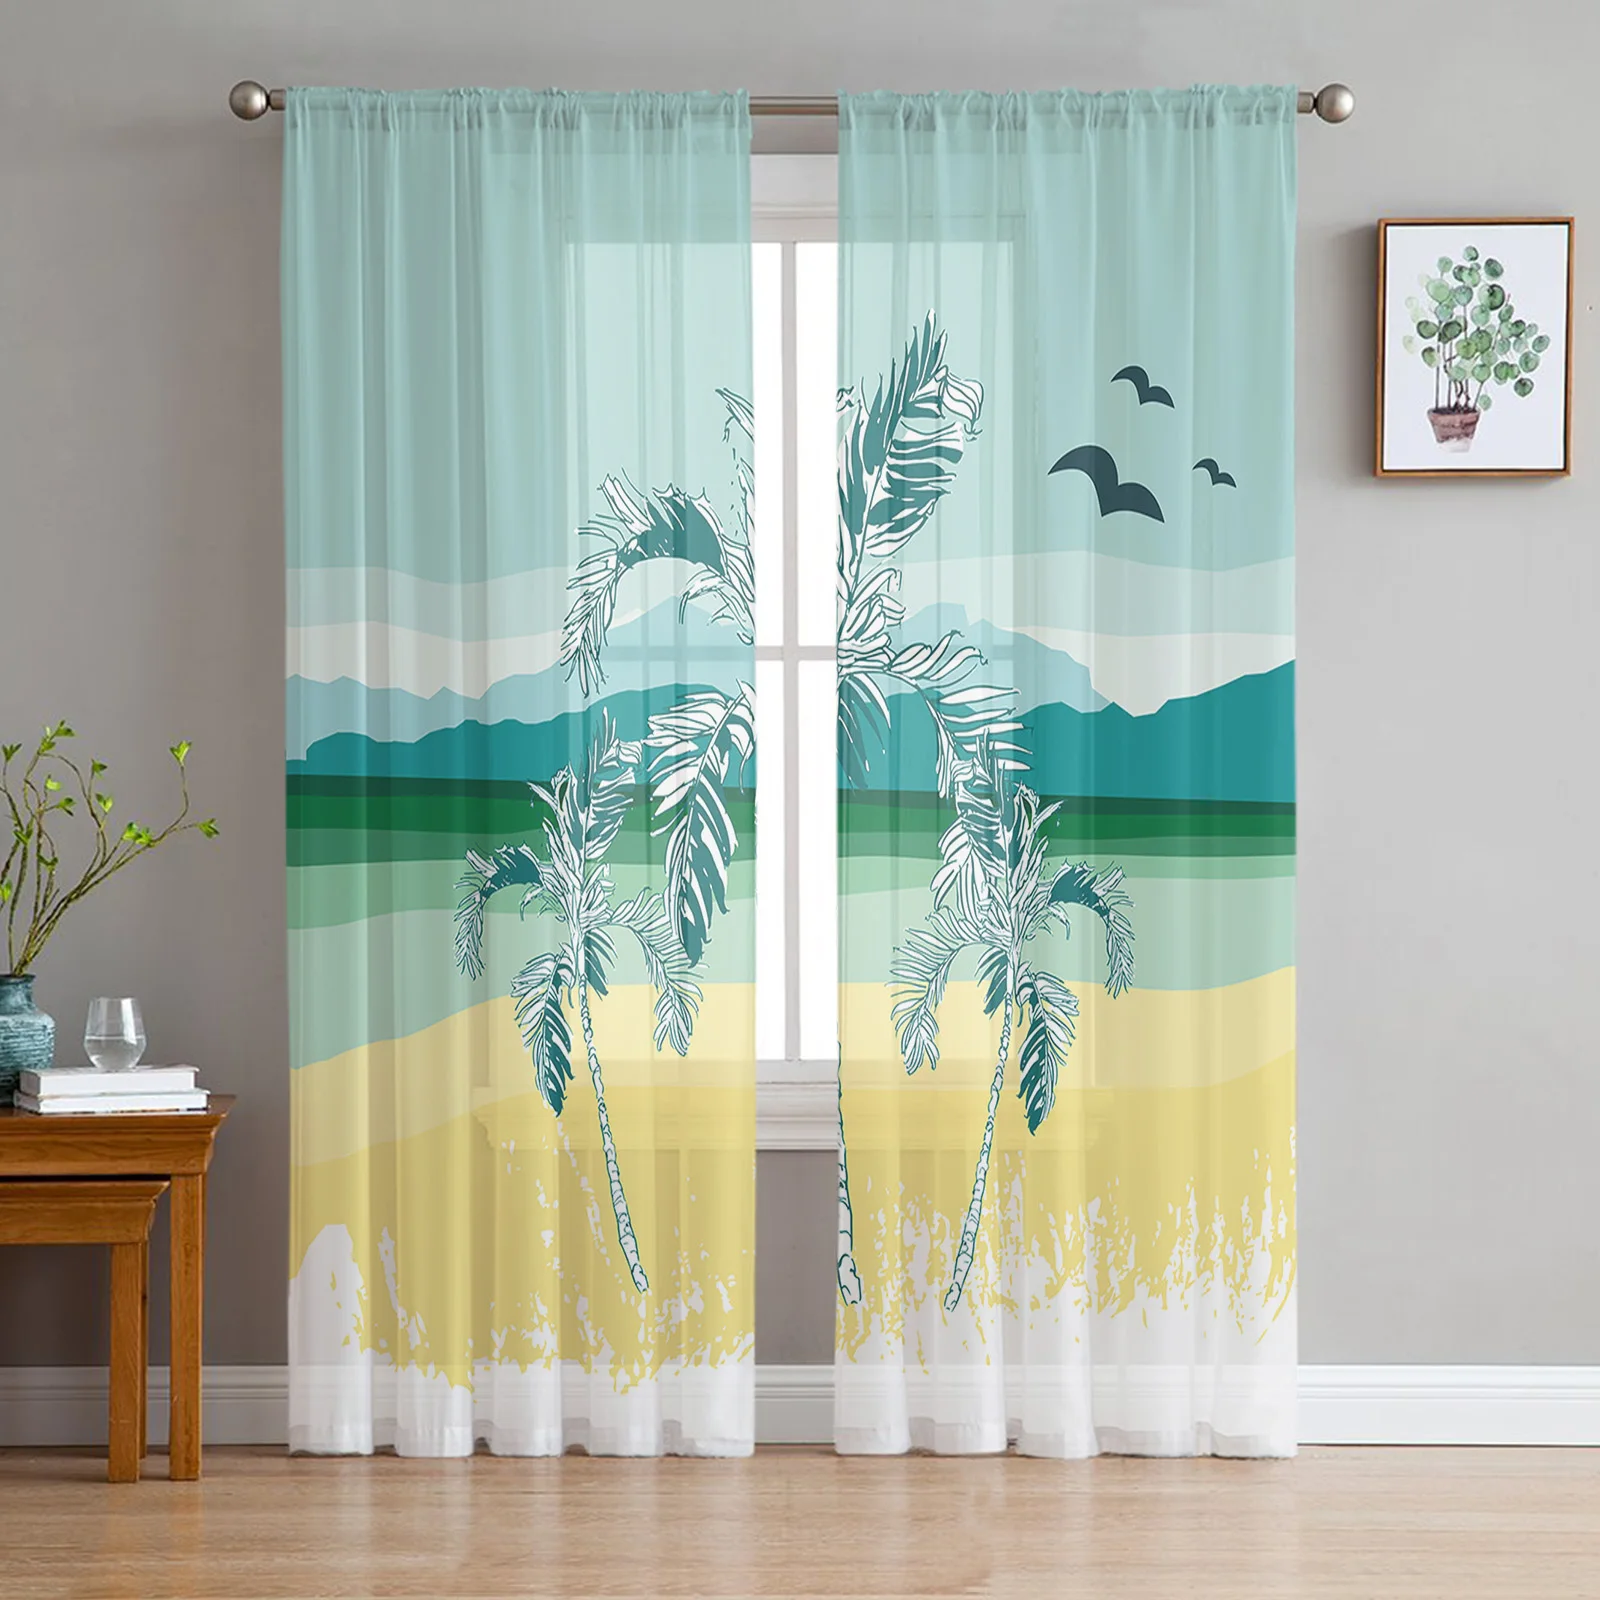 Coconut Tree Seaside Seagull Voile Sheer Curtains For Living Room Window Chiffon Tulle Curtain Kitchen Bedroom Drapes Home Decor